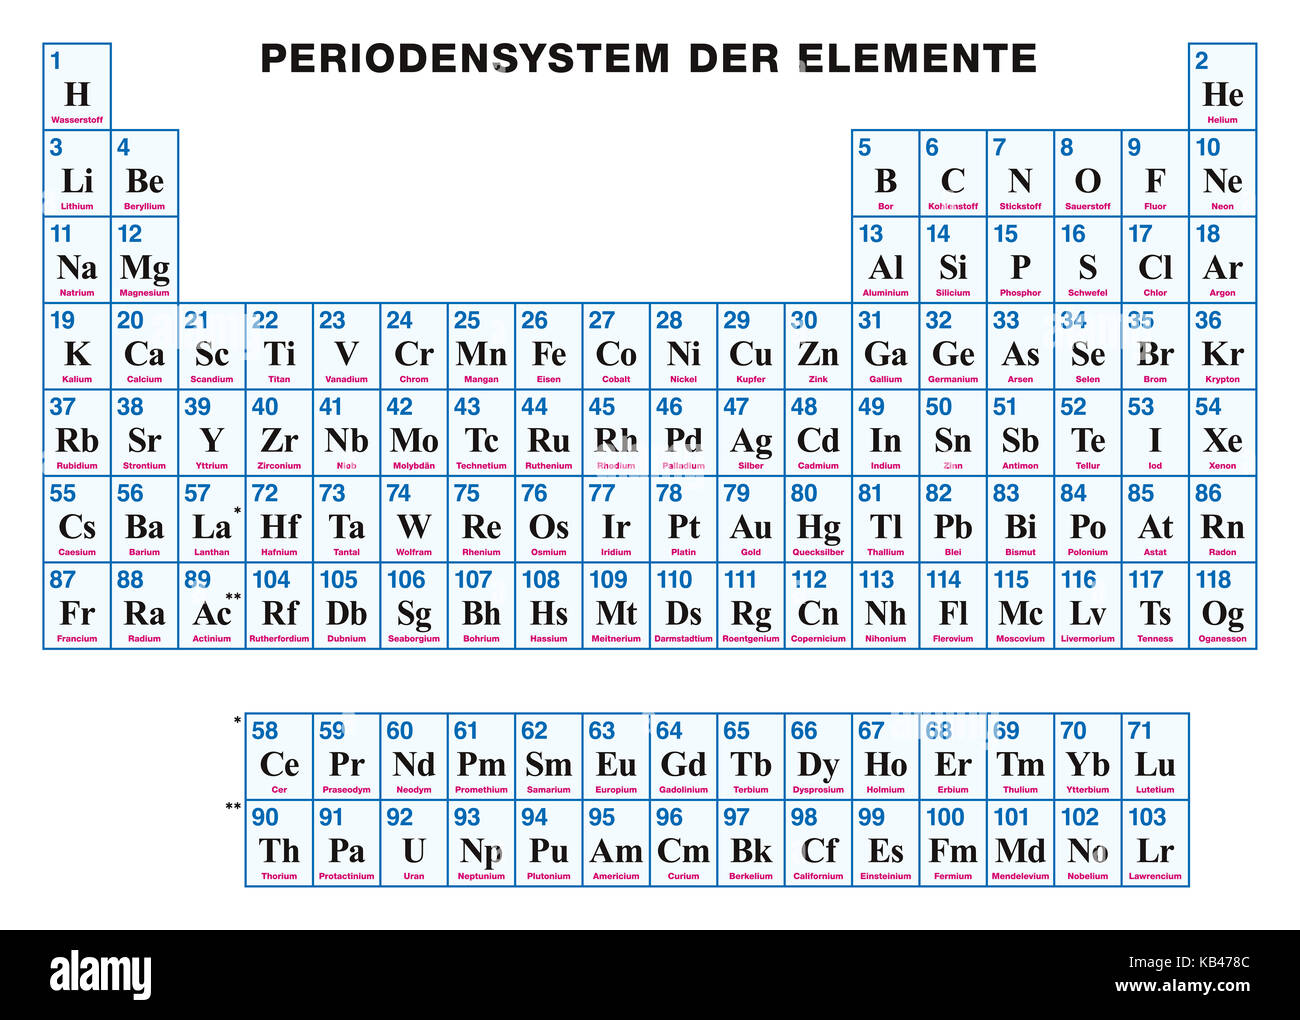 Periodic Table of the elements. GERMAN. Tabular arrangement of chemical elements with their atomic numbers, symbols and names. 118 confirmed elements. Stock Photo